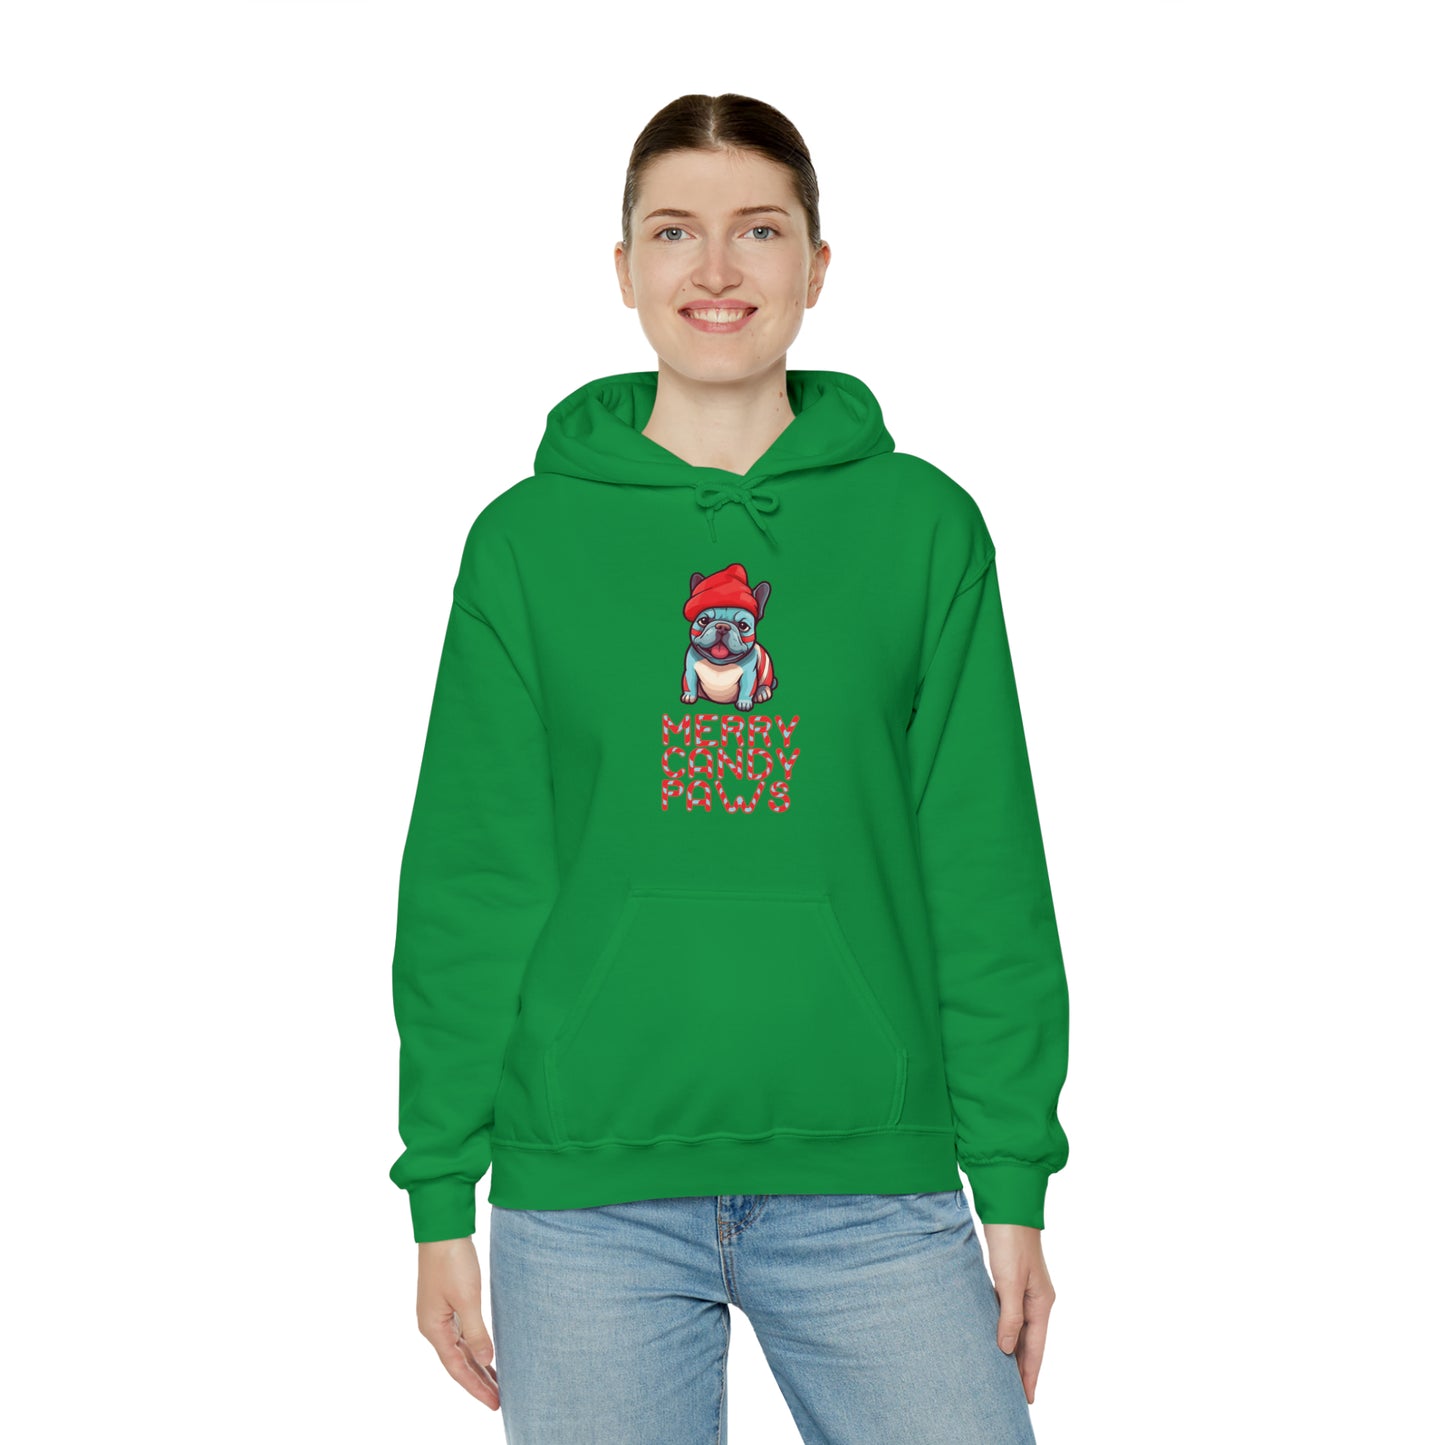 Merry Candy Paws Unisex Hoodie